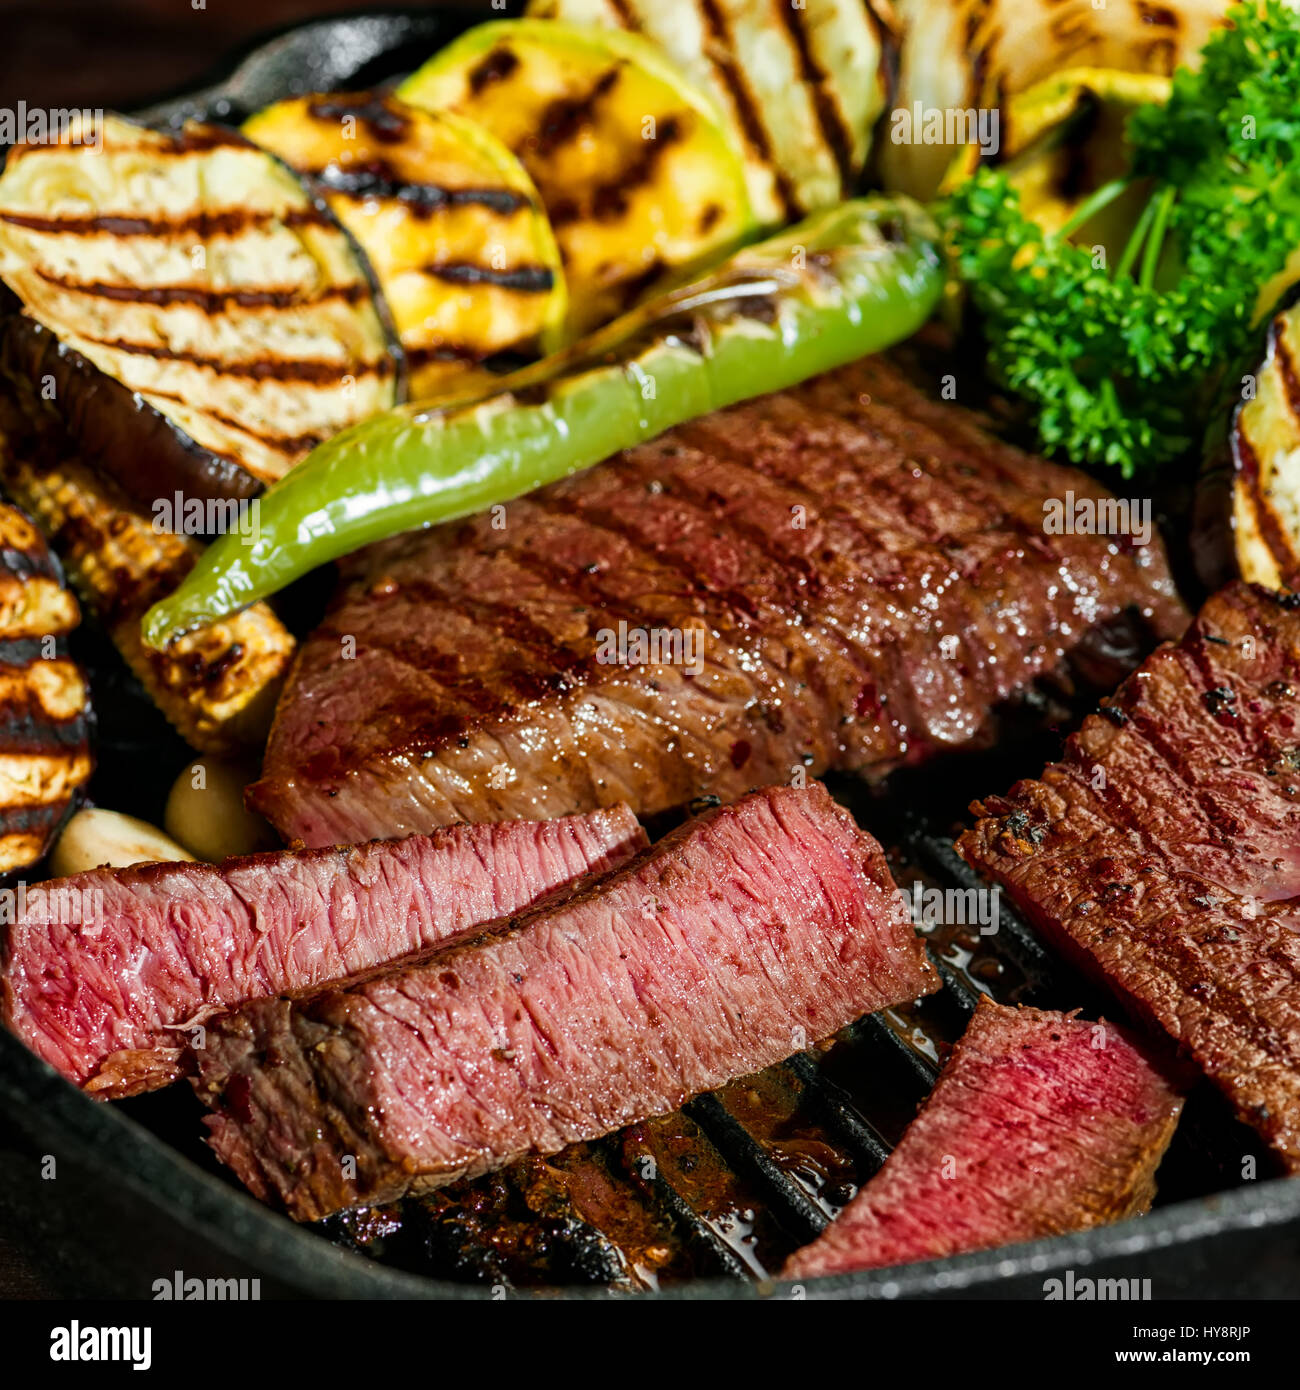 slicing delicious roasted meat with vegetable, healthy eating Stock Photo